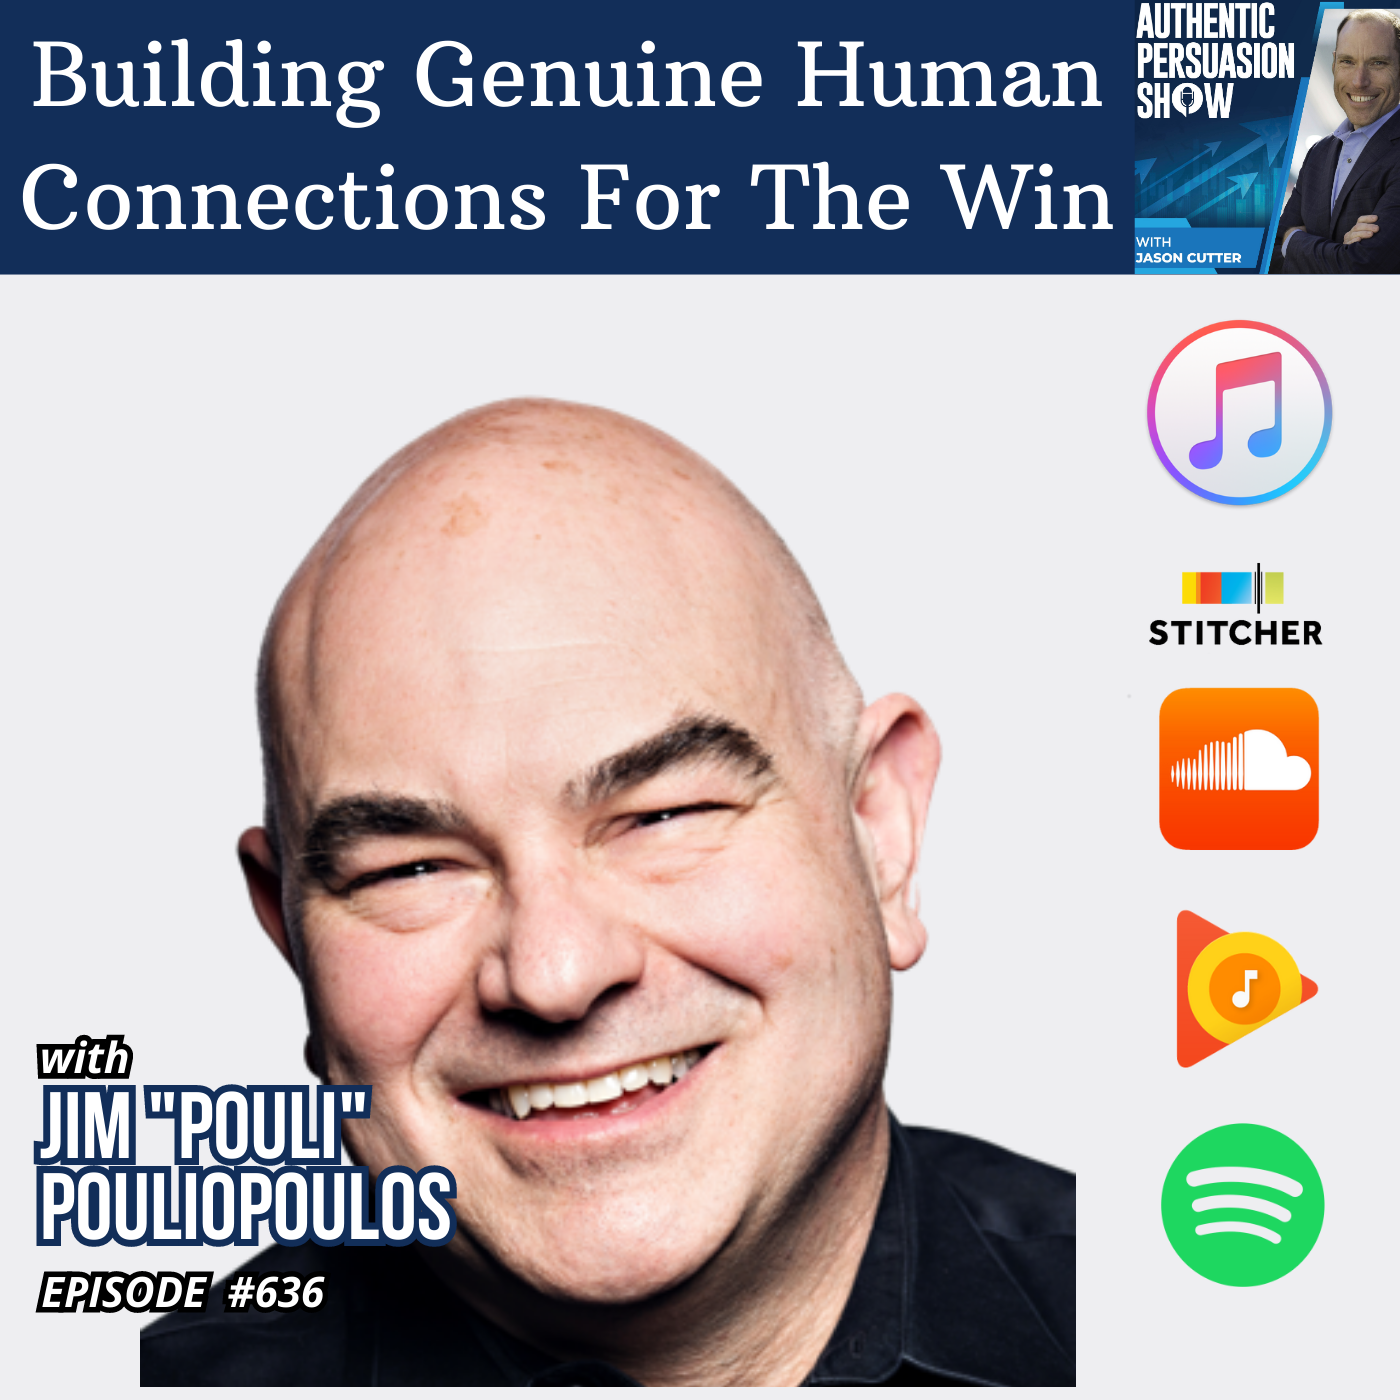 [636] Building Genuine Human Connections For The Win, with Jim Pouliopoulos from Bentley University